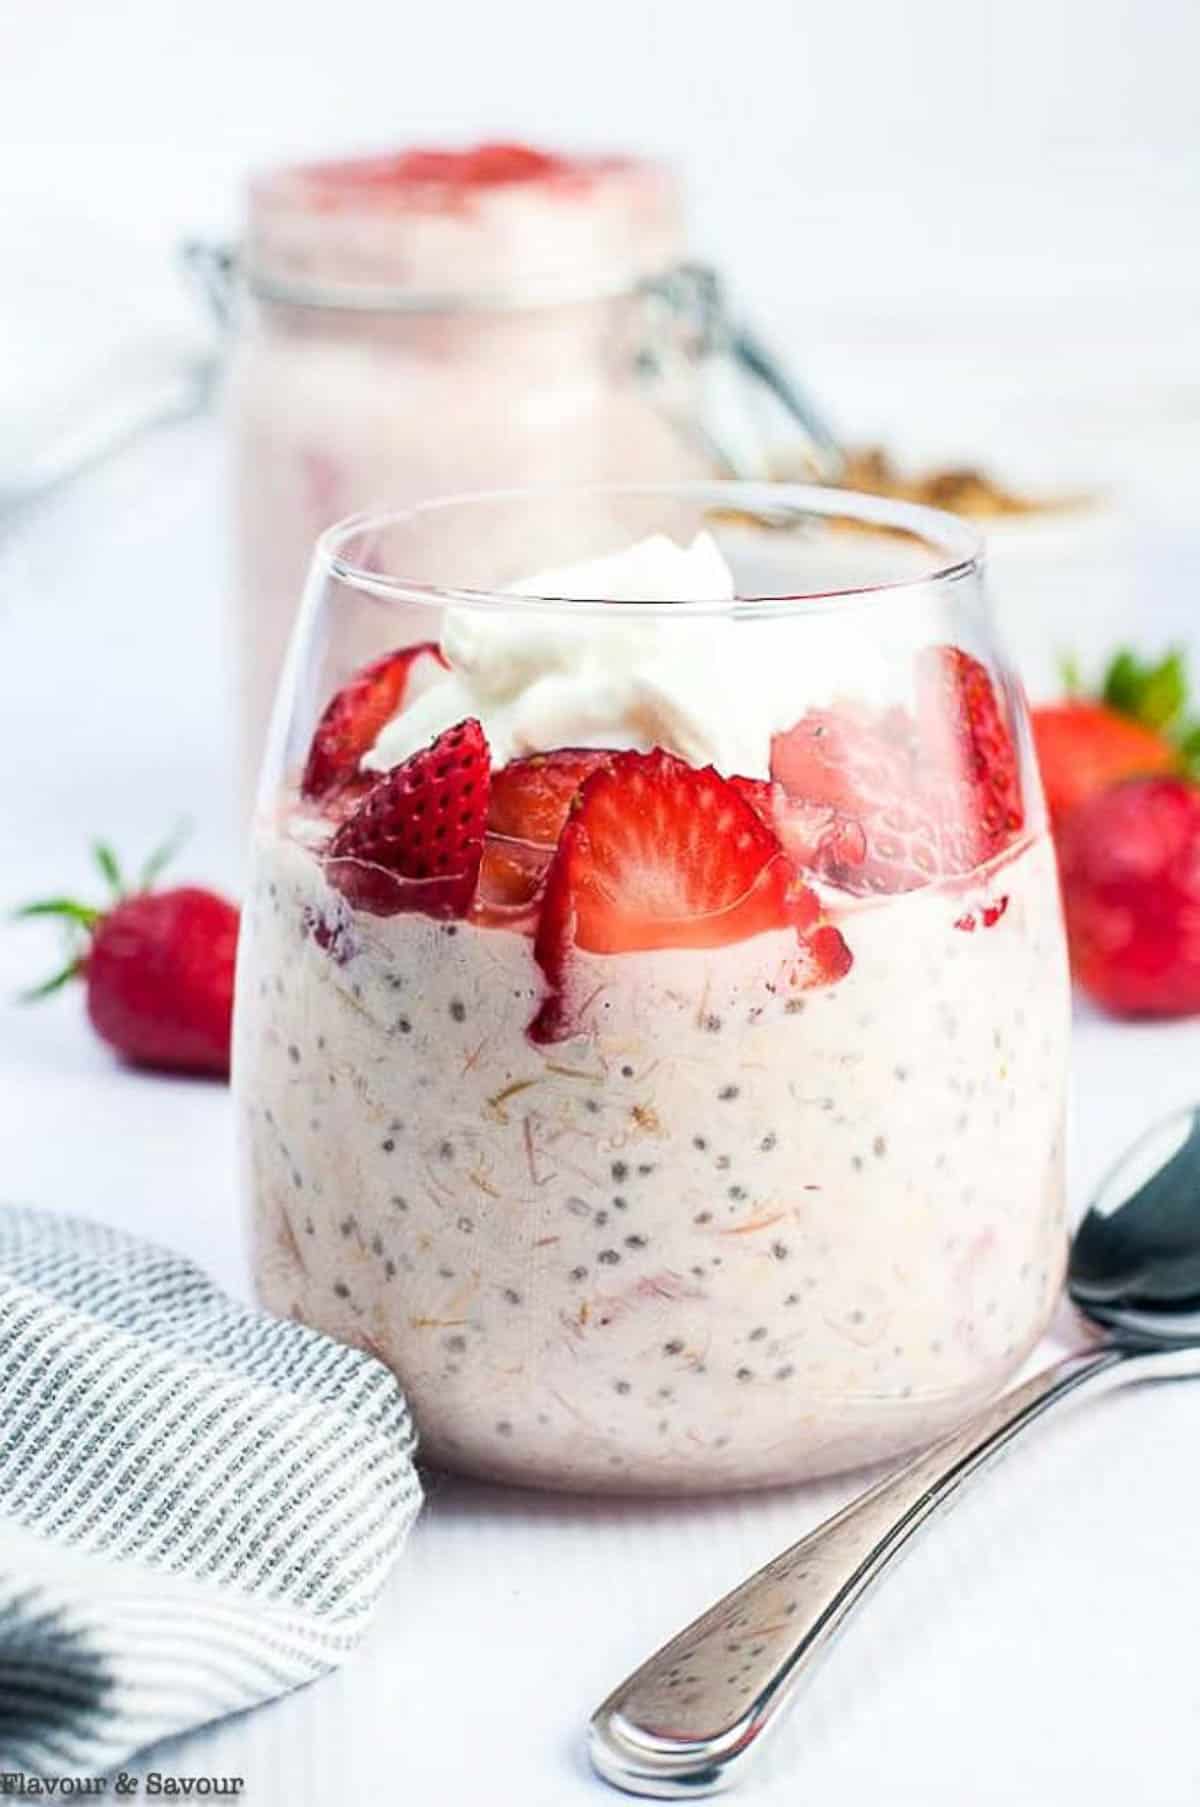 A dessert glass filled with strawberry rhubarb overnight oats.